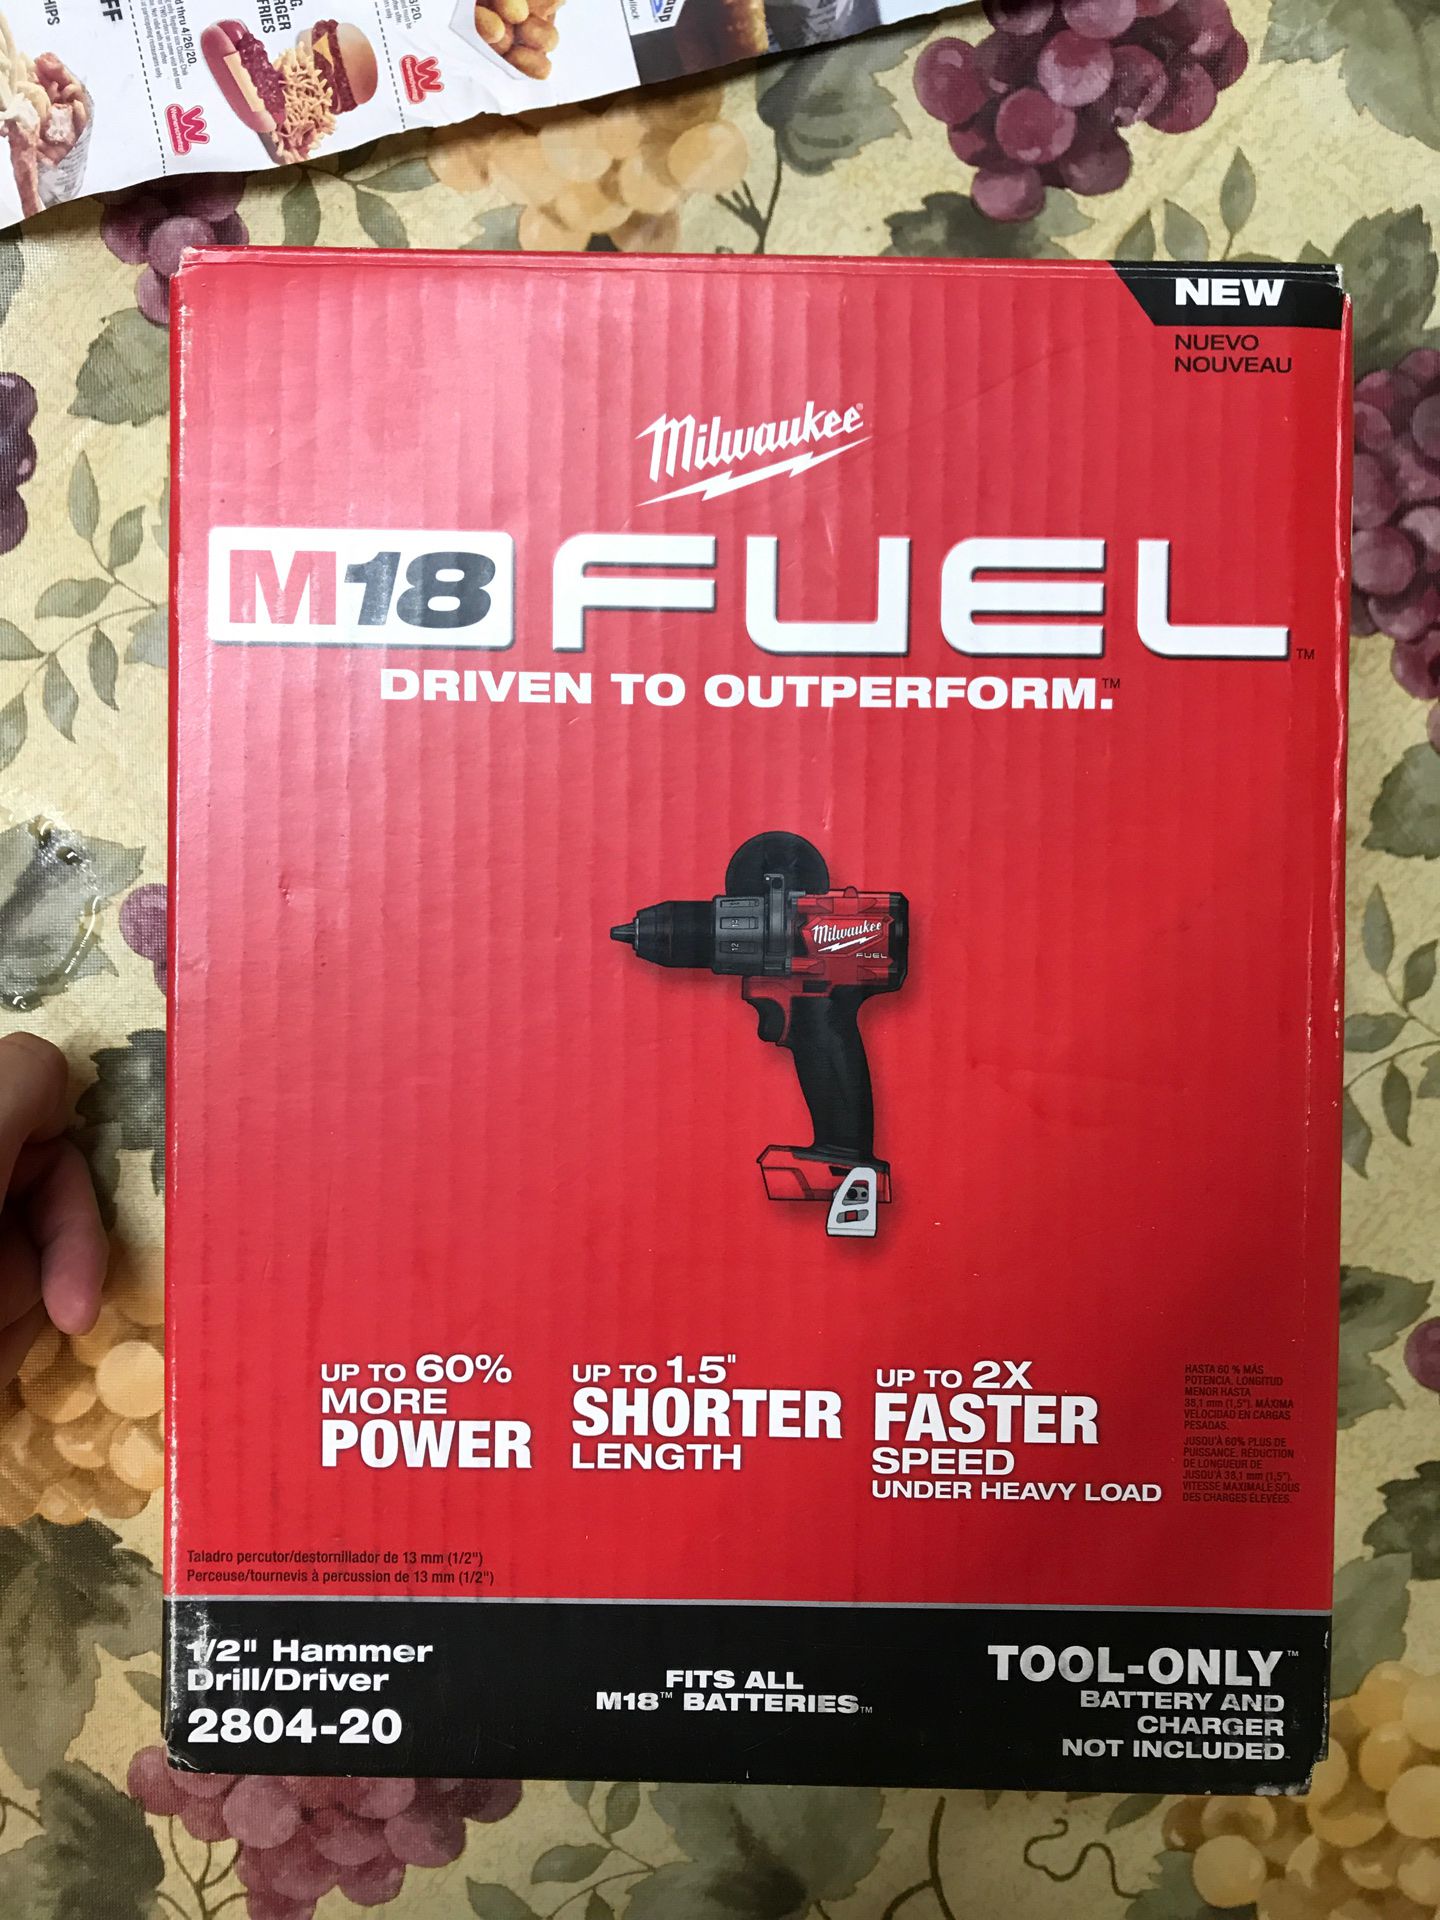 Milwaukee 1/2 Drill Fuel ⛽️.! Never open .! Sealed in📦 box asking $80 only.! 🔥